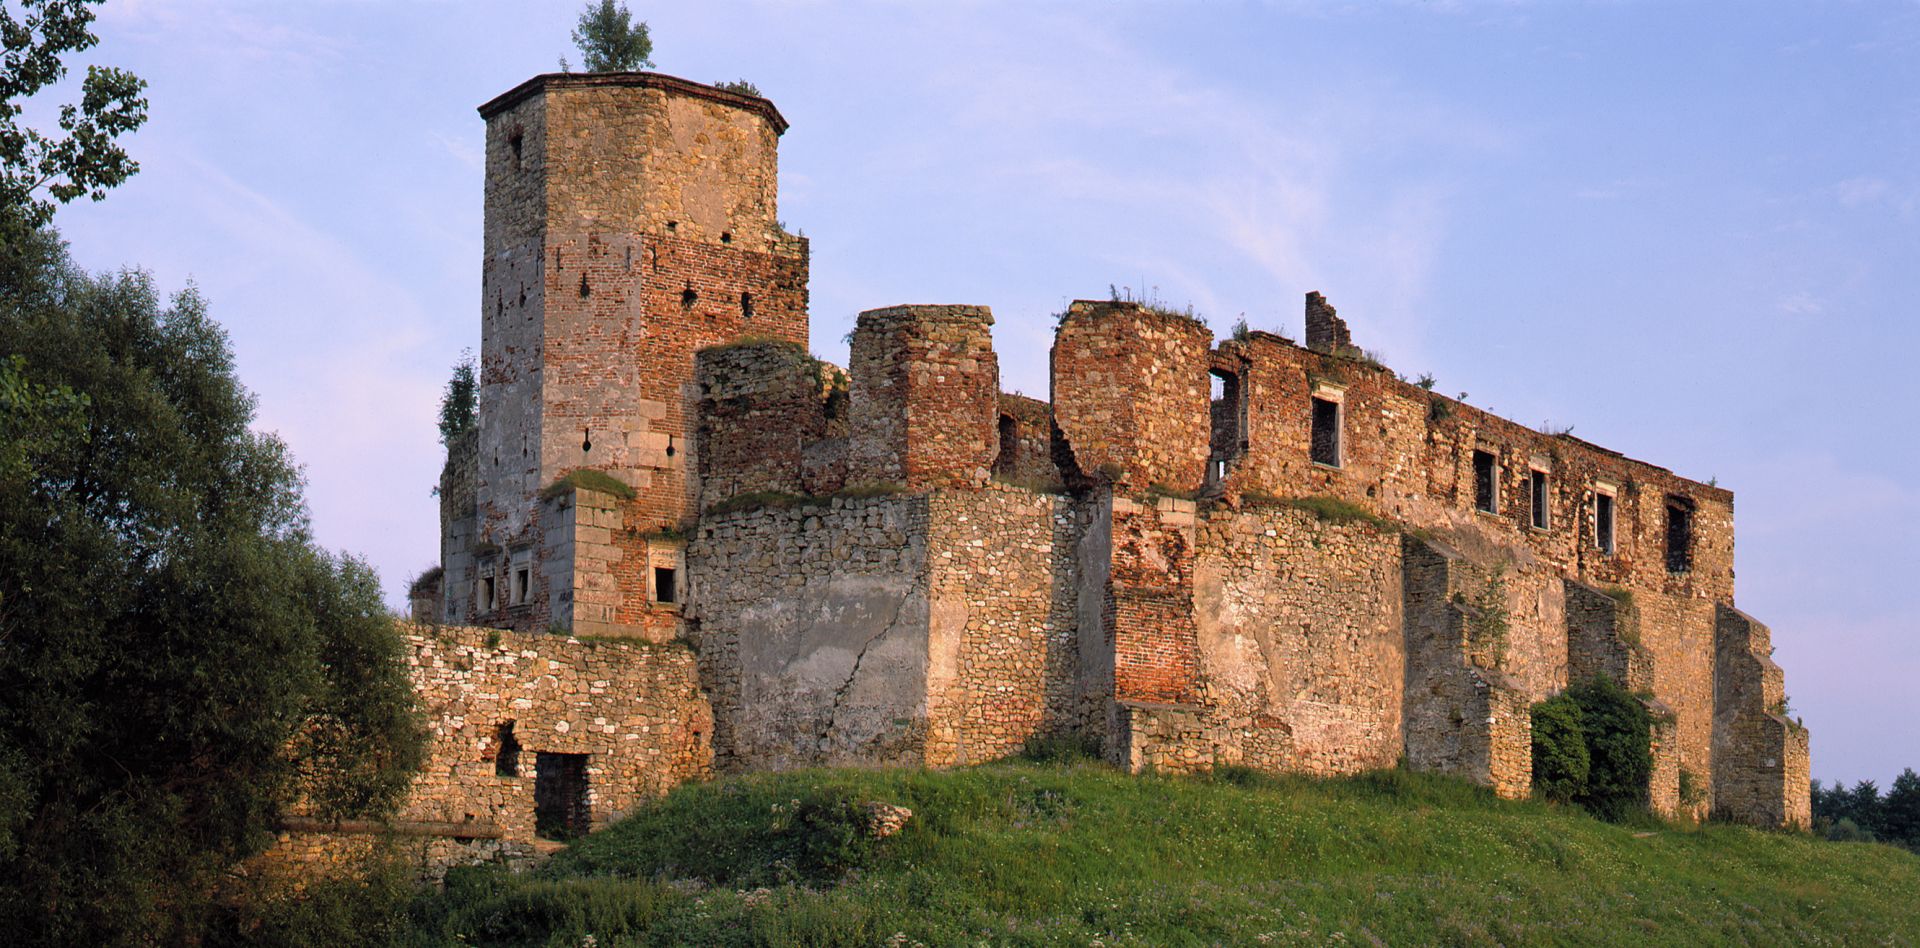 Ruins of stronghold in Siewierz